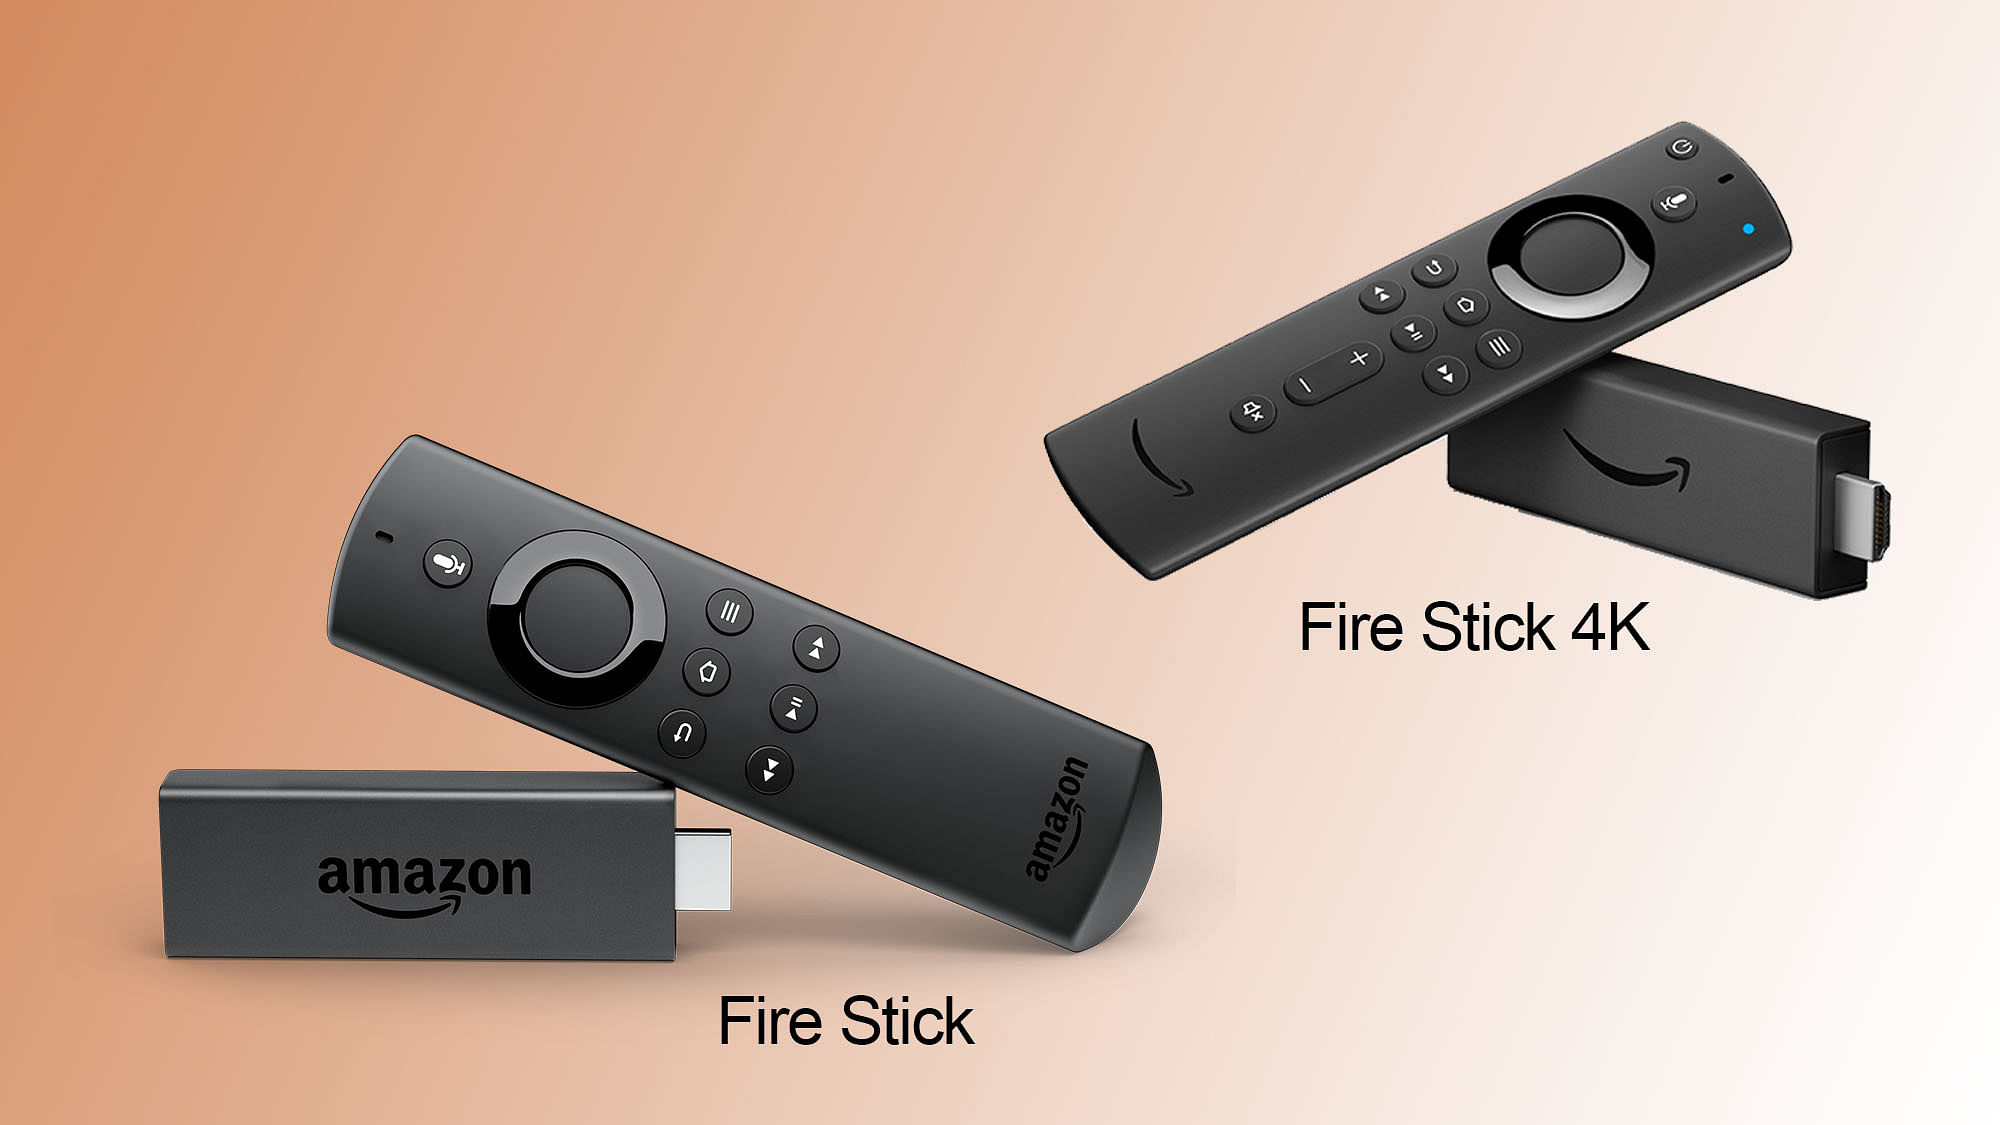 Will the new-look Fire Stick from Amazon justify the price hike?